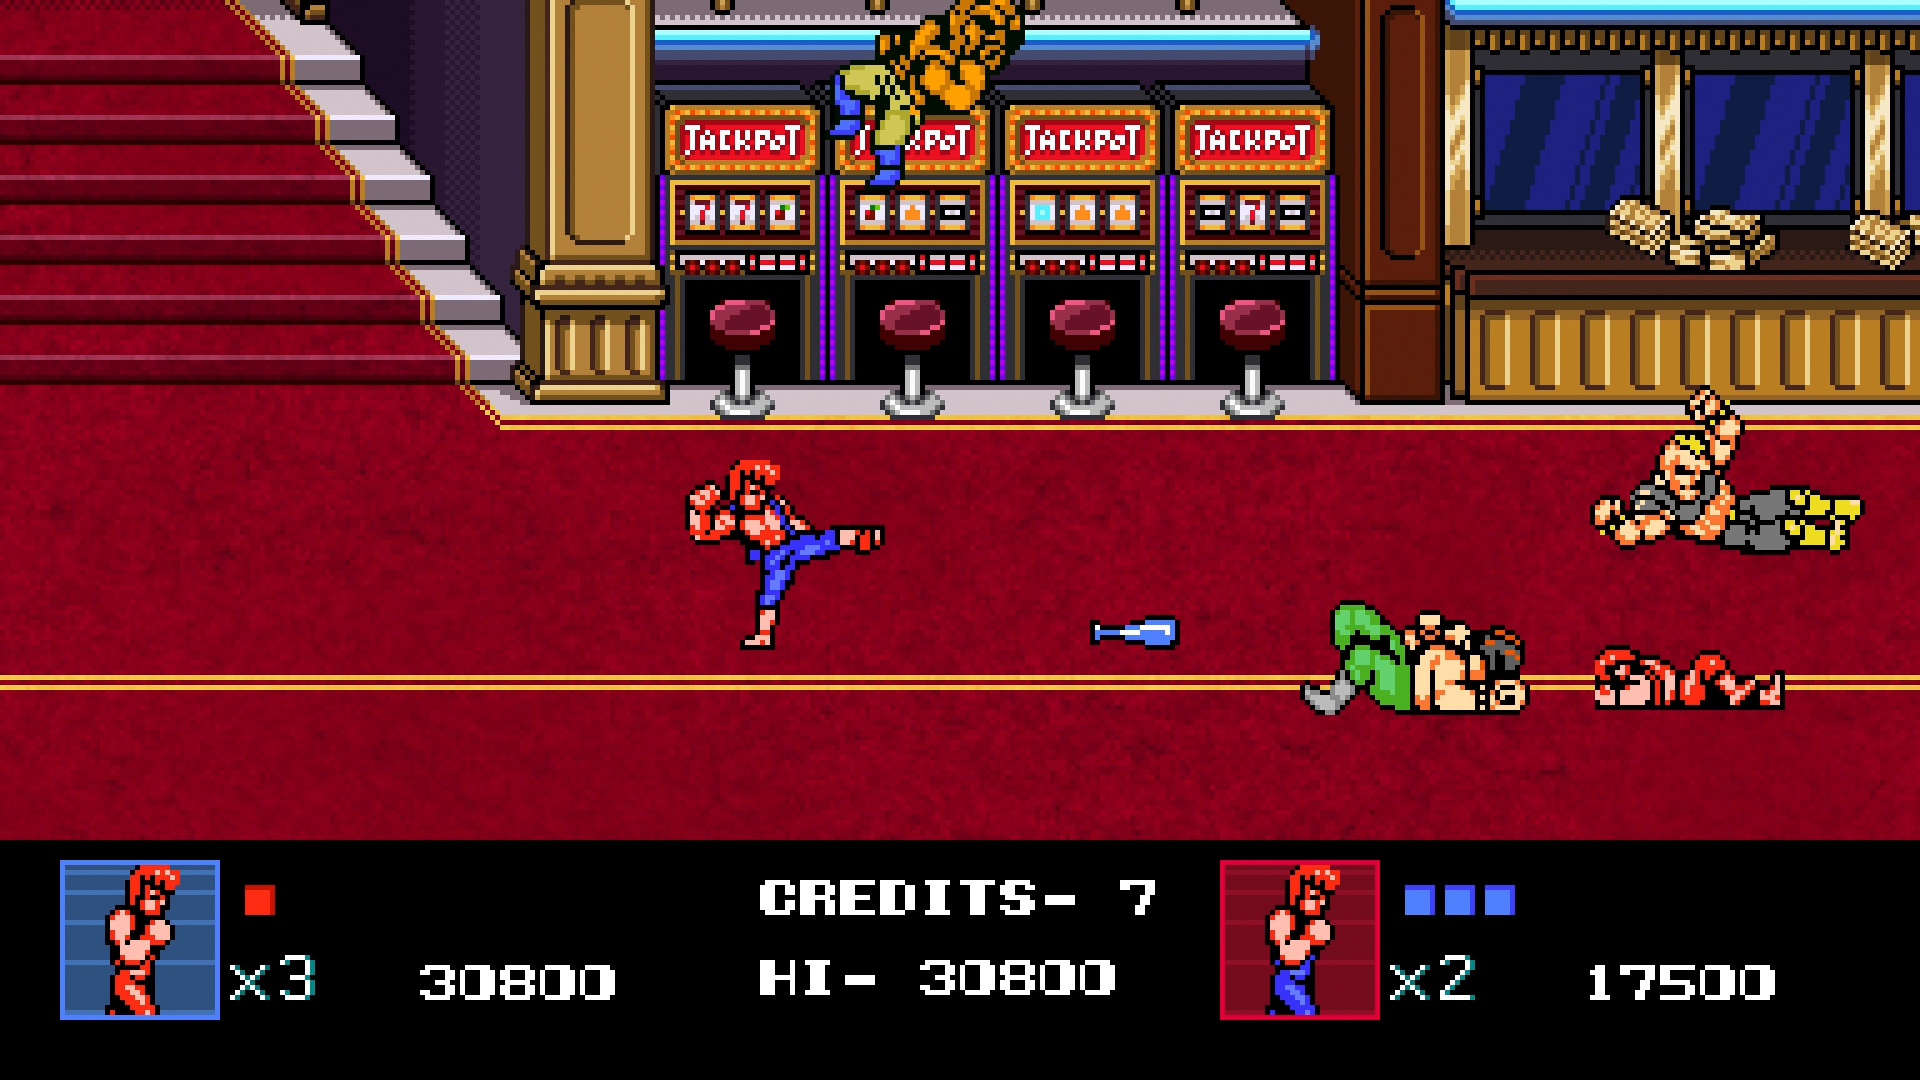 Co-Optimus - Review - Double Dragon: Neon Co-Op Review